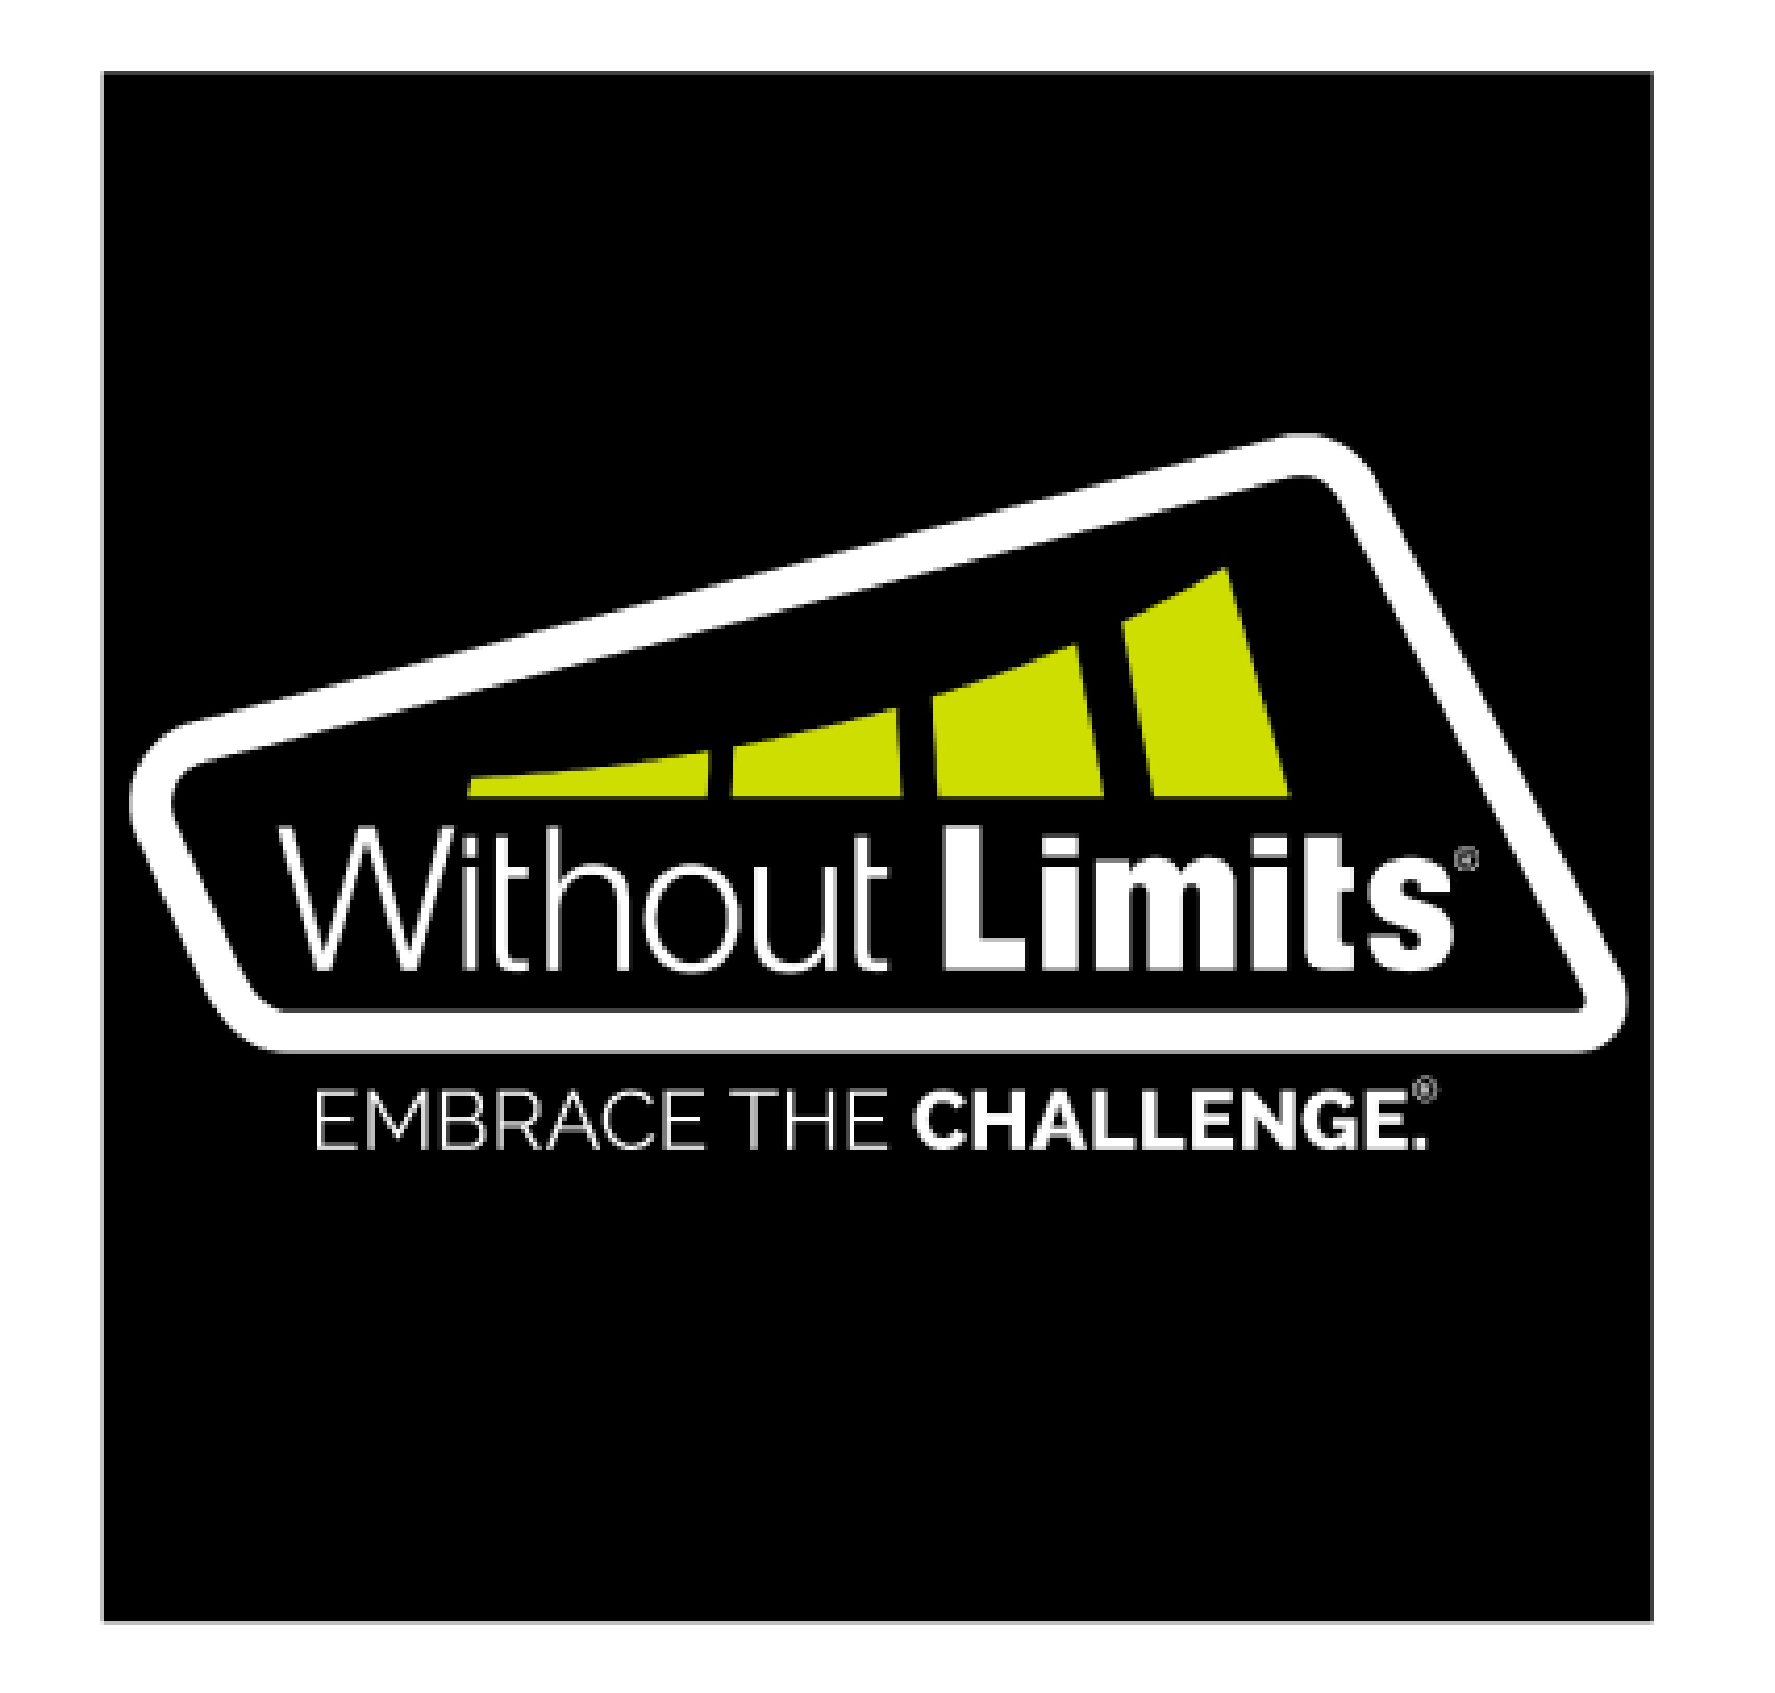 Without Limits logo